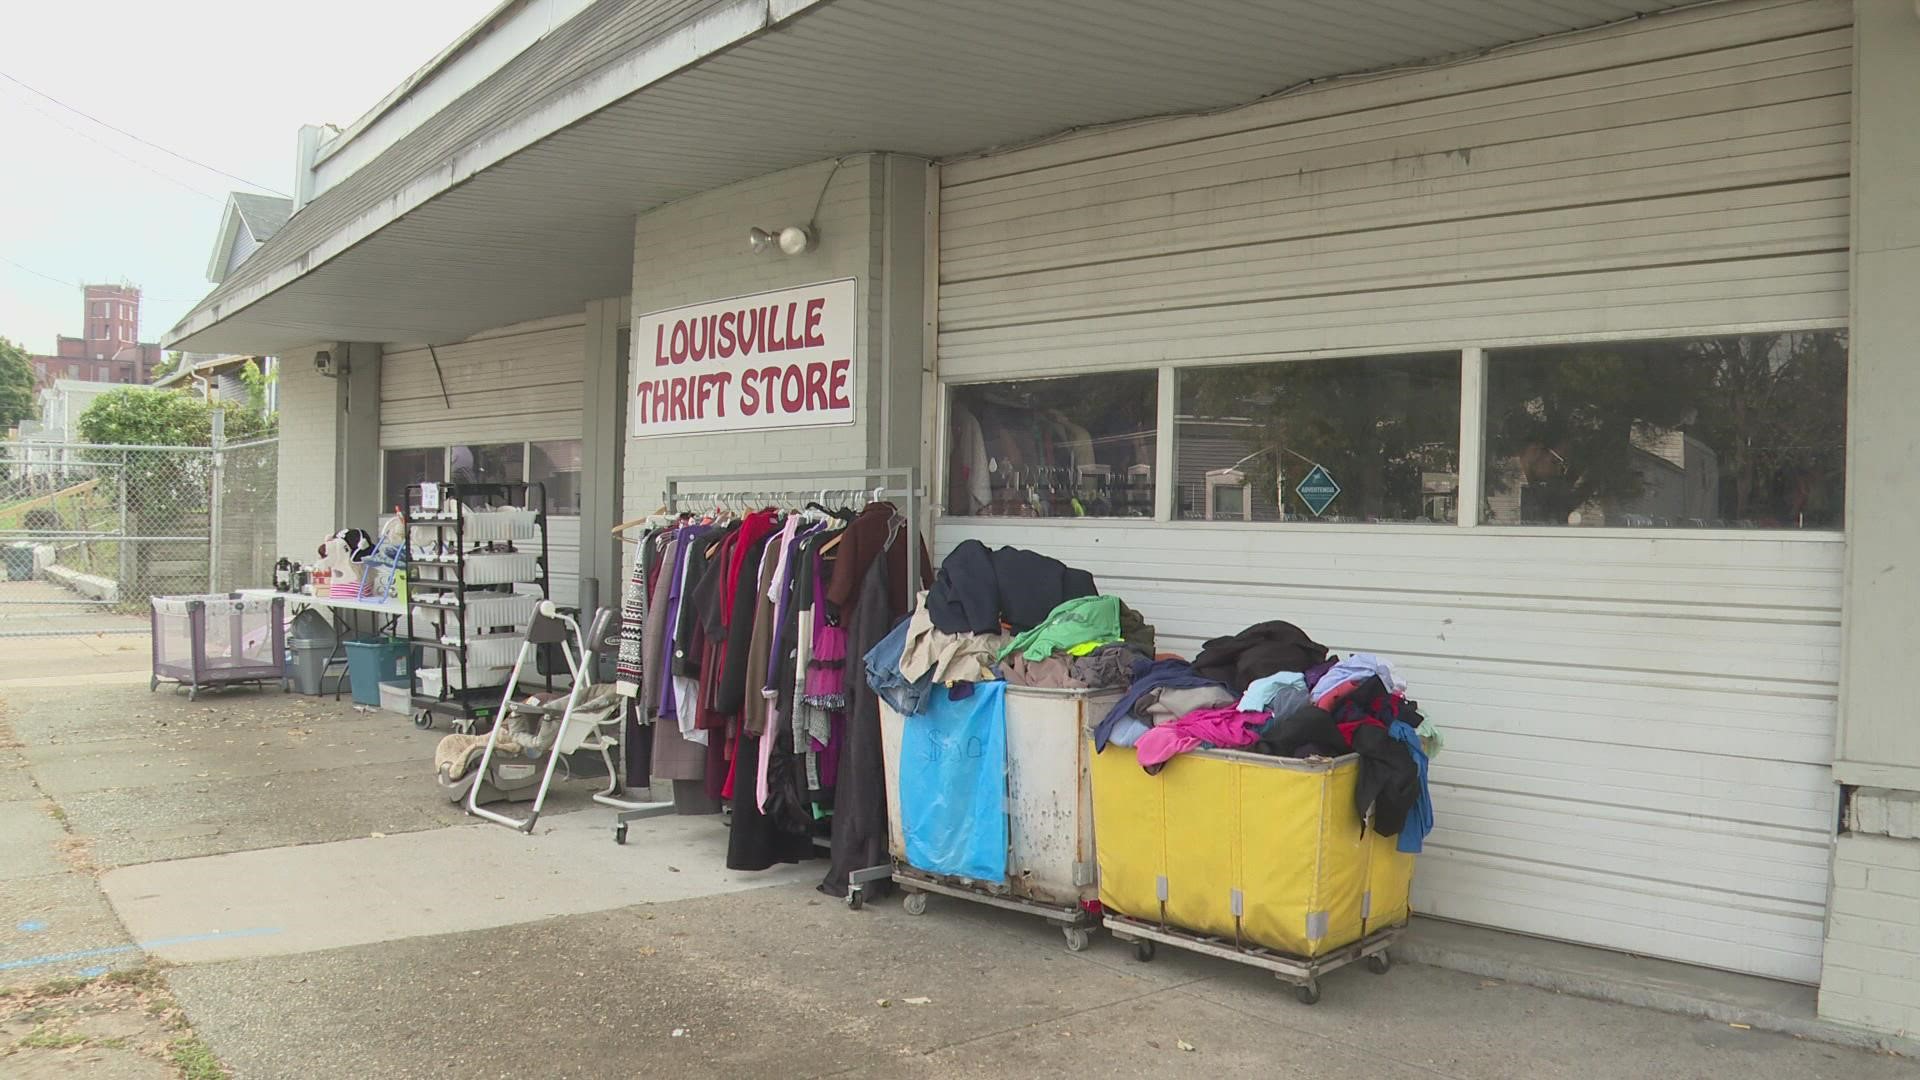 Louisville Thrift Store faces hardships during MSD construction. Thursday, Scott began to see light at the end of the tunnel as one of the barricades we're removed.